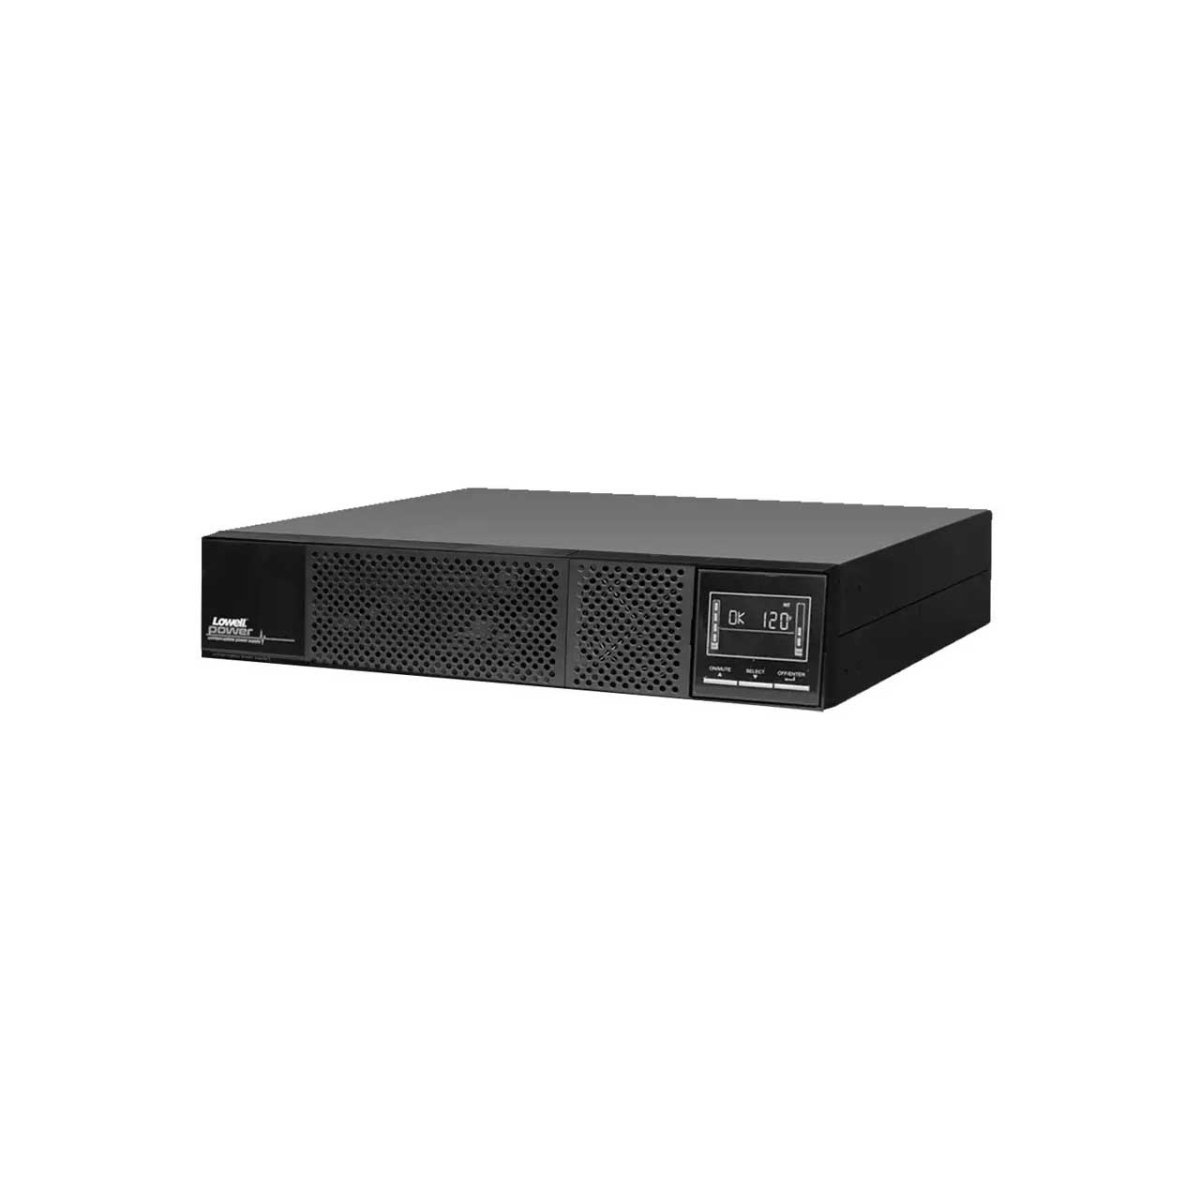 Picture of Lowell Manufacturing LMC-UPS9A-3000IP 3000VA 2880 watt UPS9A-3000-IP Online Power Conditioner - UPS with SNMP Remote Monitoring